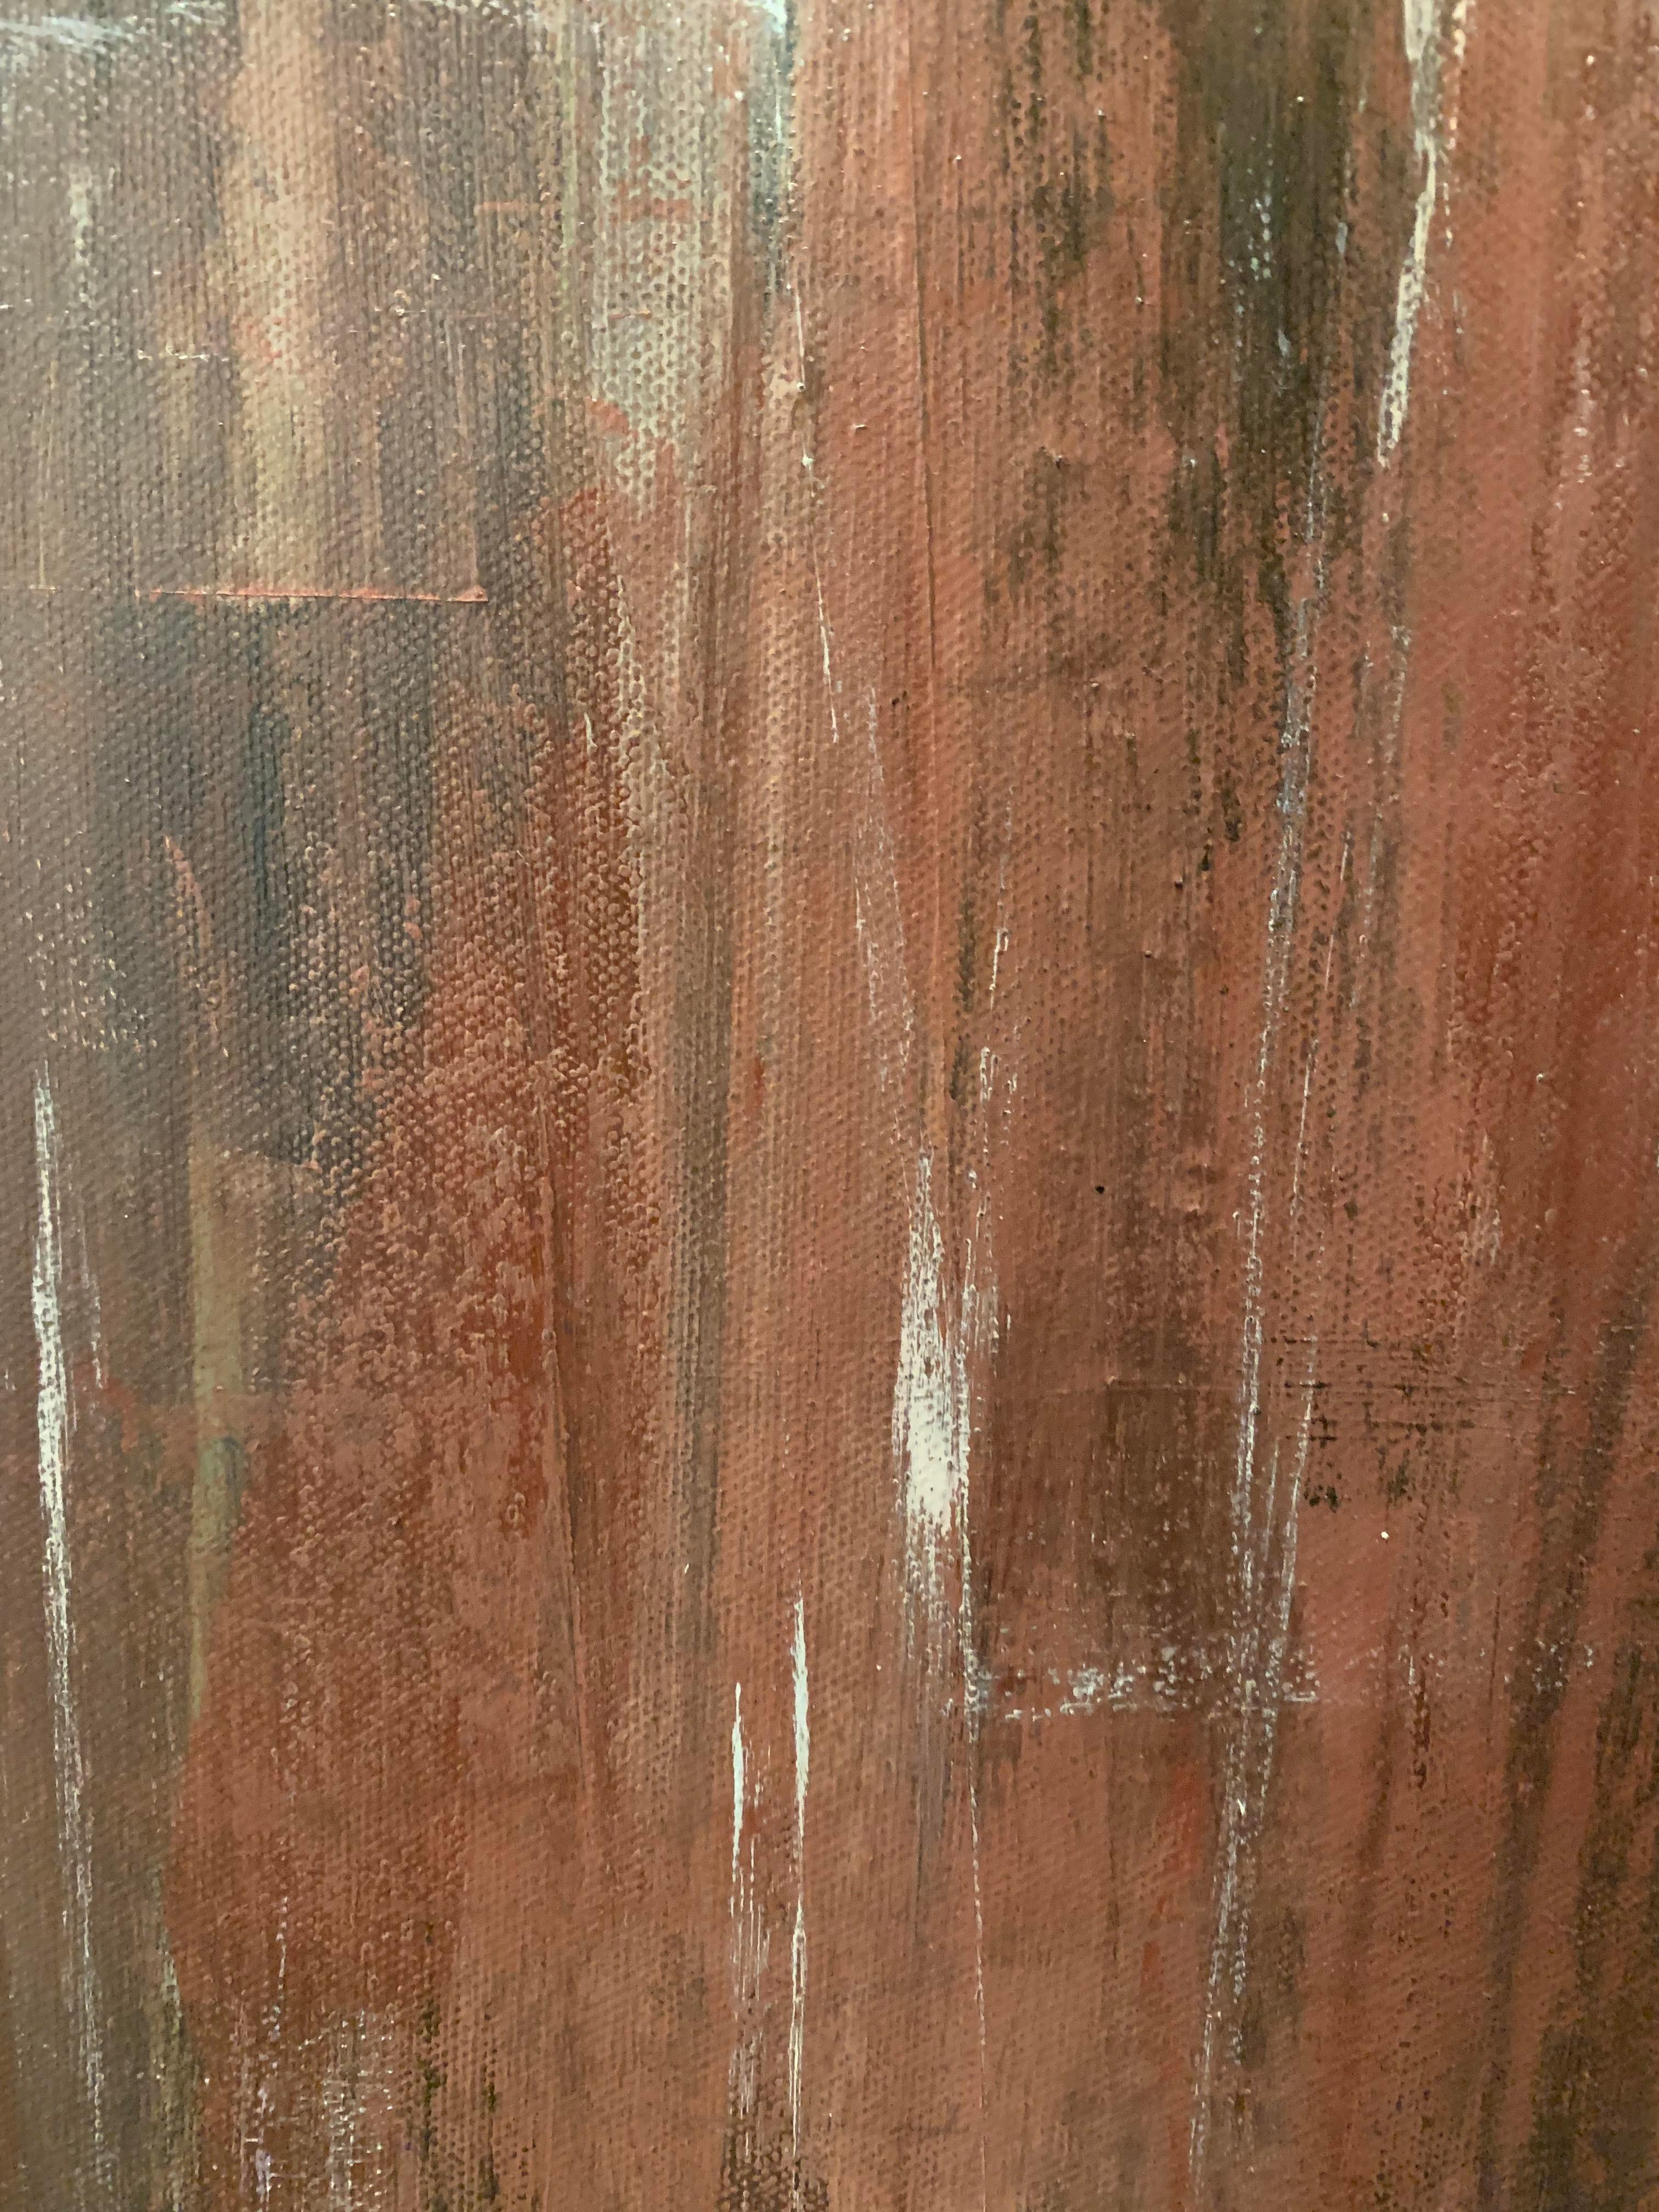 This acrylic on canvas painting is abstract featuring shades and tints of brown, black, and white. It's a wistful piece, with colors that flow from rust to rose. The balanced composition creates a sense of structure and layering in this painting.